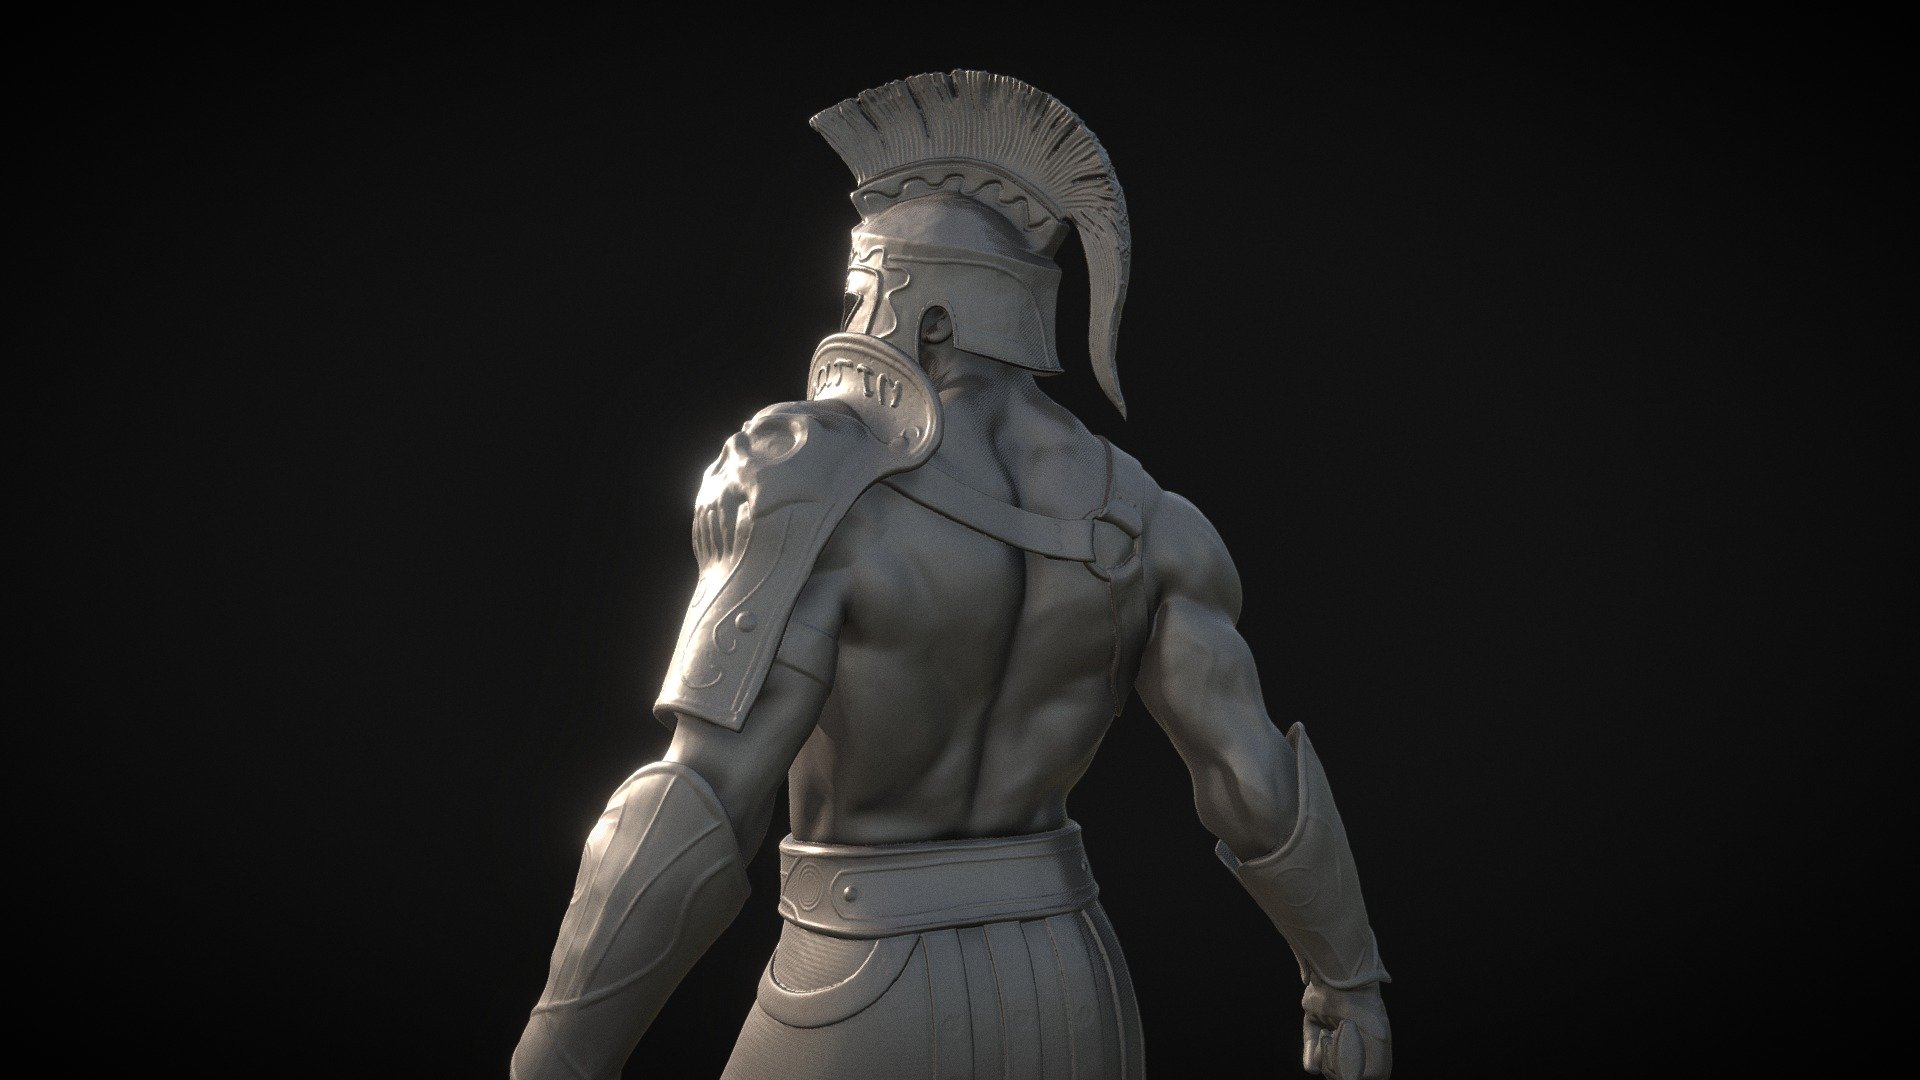 Cuts and joints ready.
Old project for 3d printing.
Made in Zbrush.

For enqueries: omassyx@gmail.com - Spartan - omsx - Buy Royalty Free 3D model by Omassyx 3d model